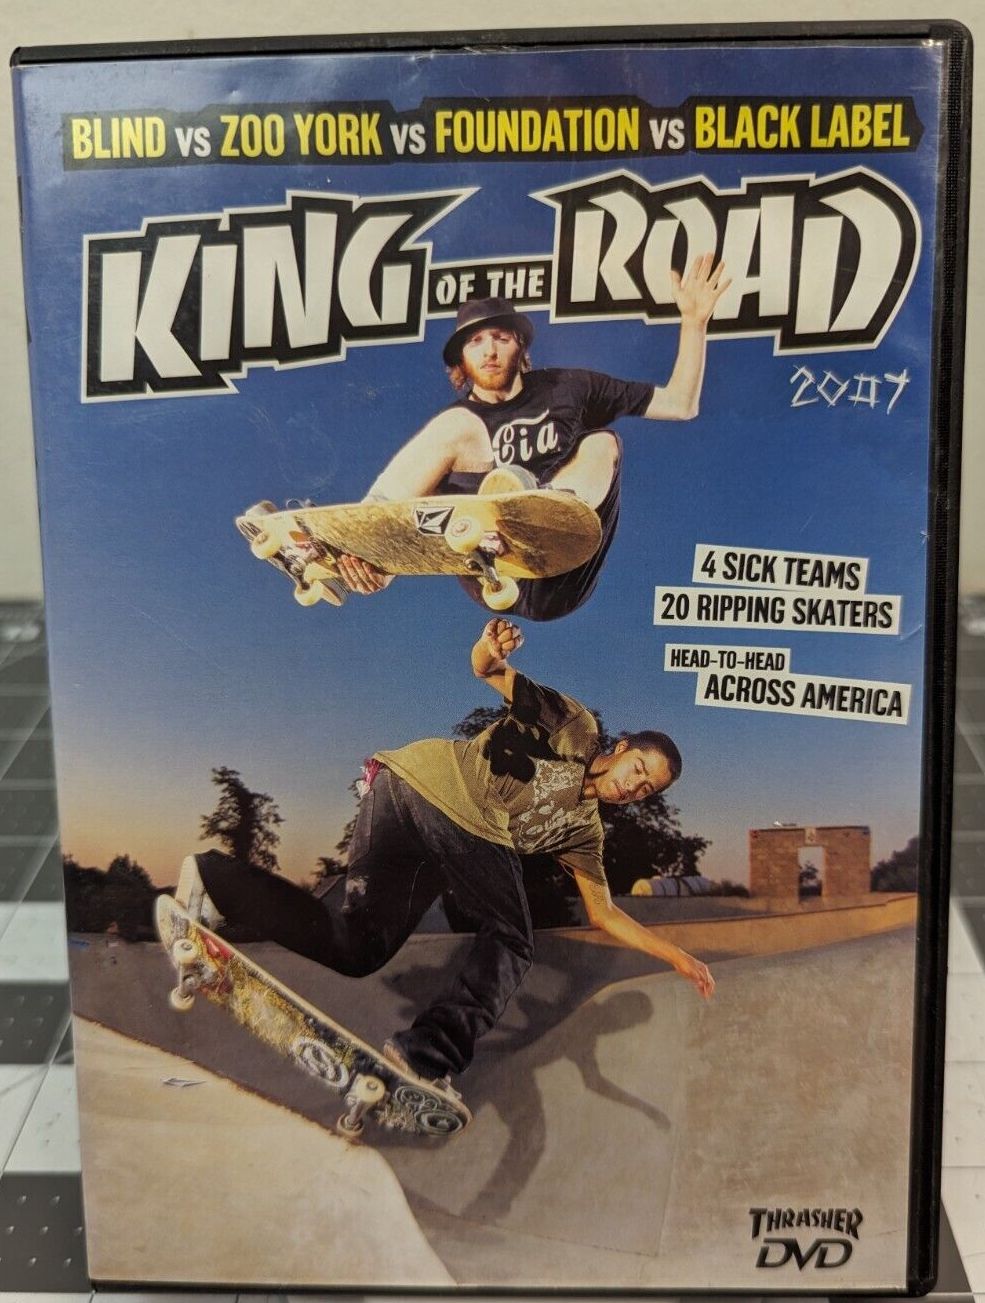 Thrasher - King Of The Road 2007 cover